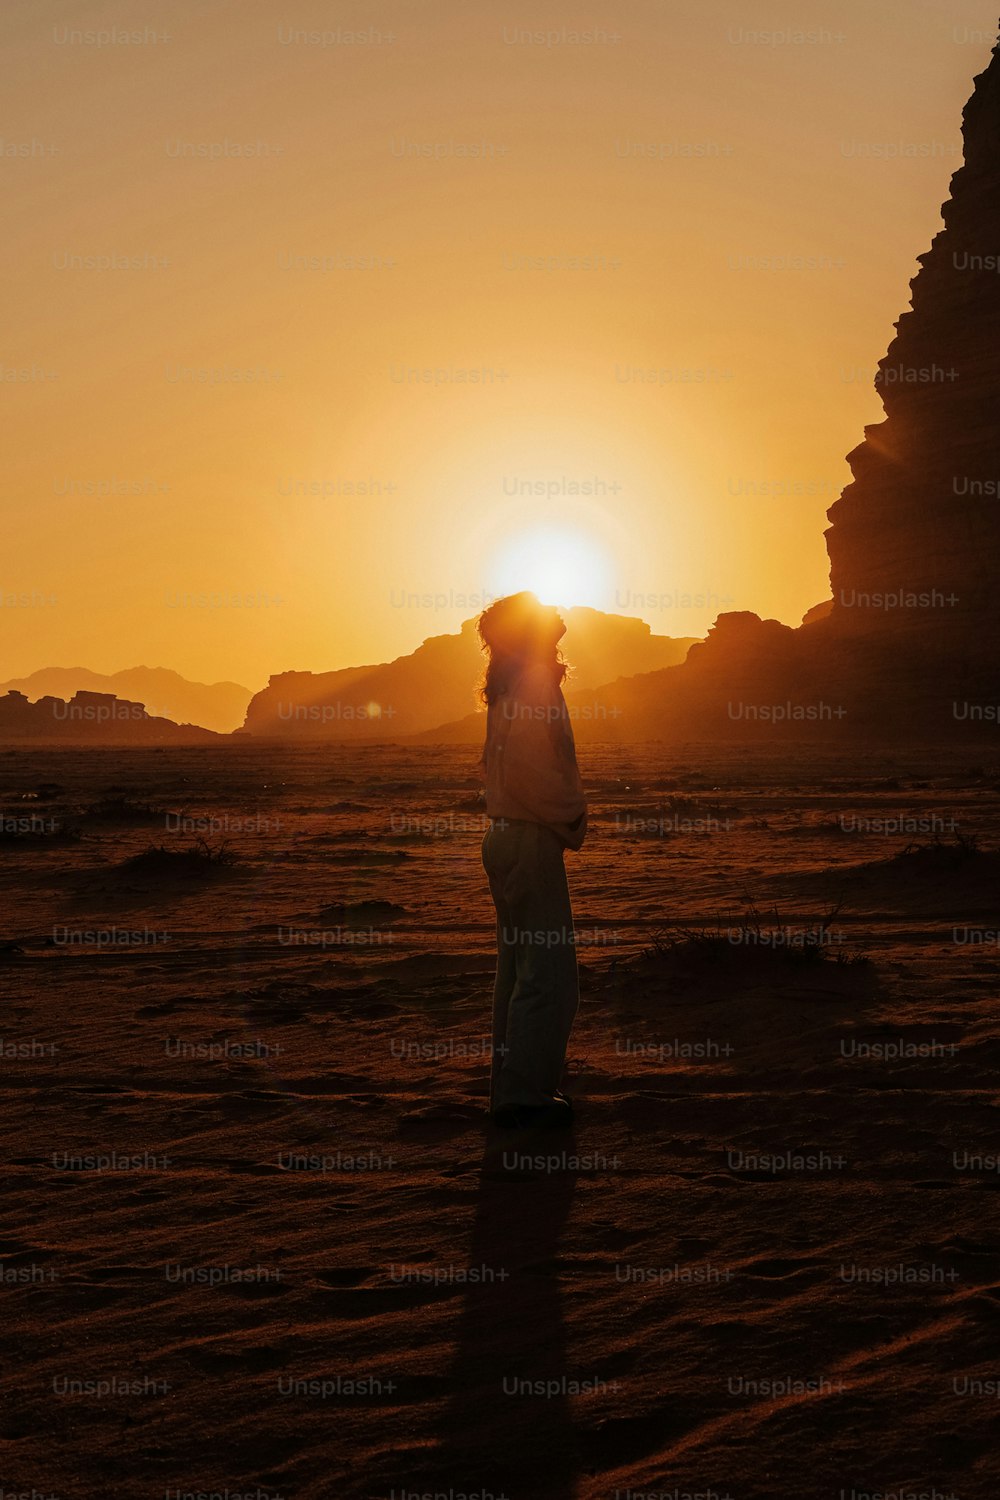 a person standing in the middle of a desert at sunset